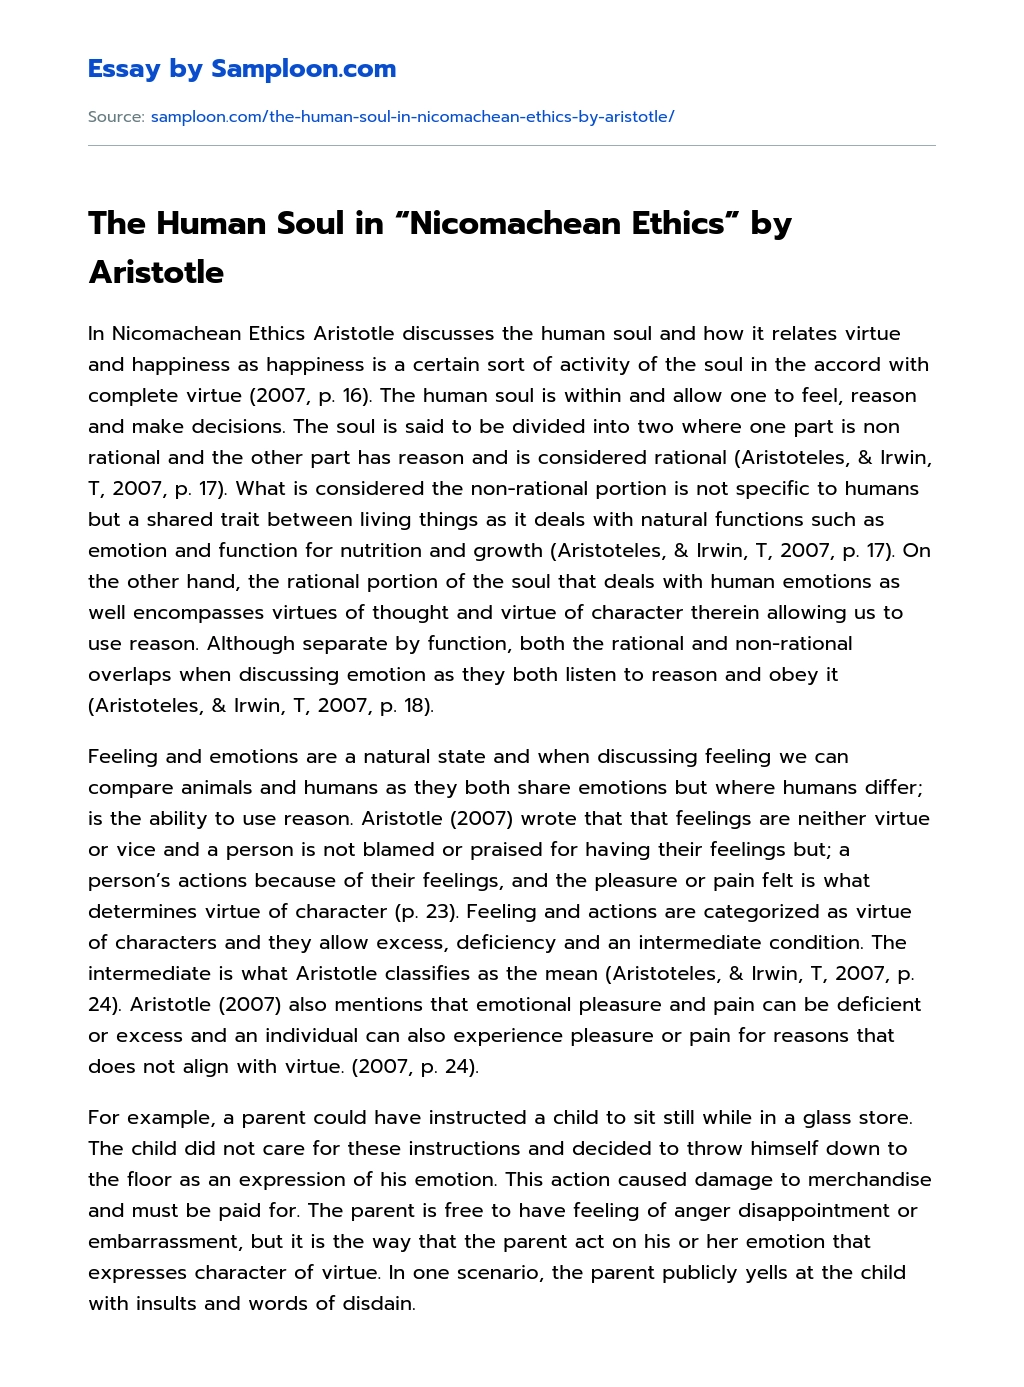 The Human Soul in “Nicomachean Ethics” by Aristotle essay